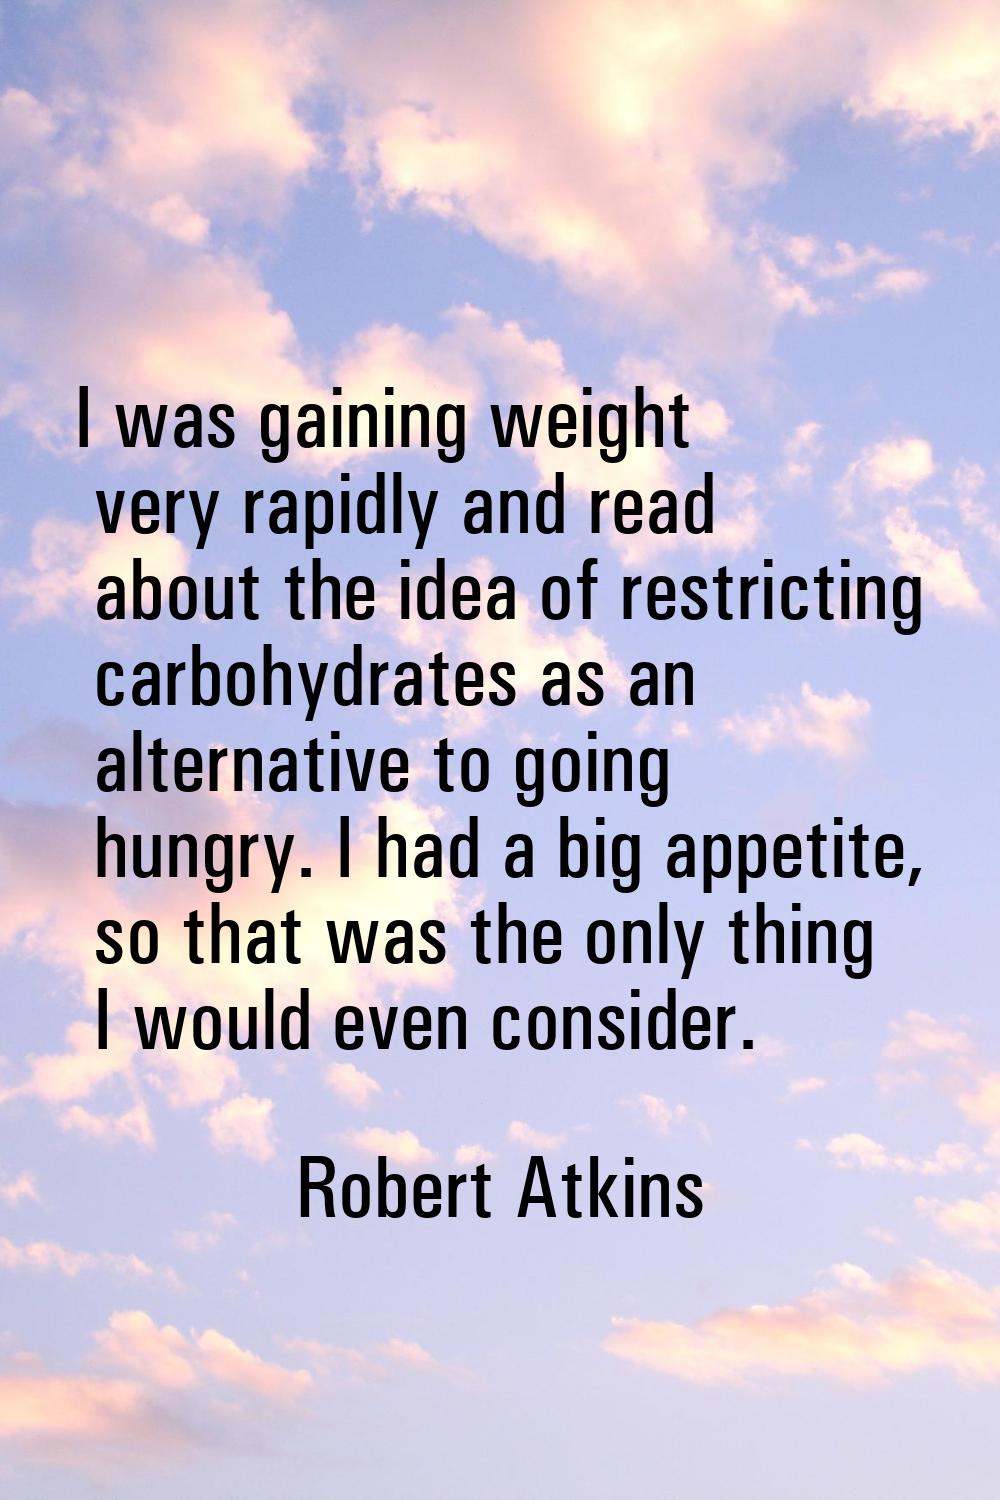 I was gaining weight very rapidly and read about the idea of restricting carbohydrates as an altern